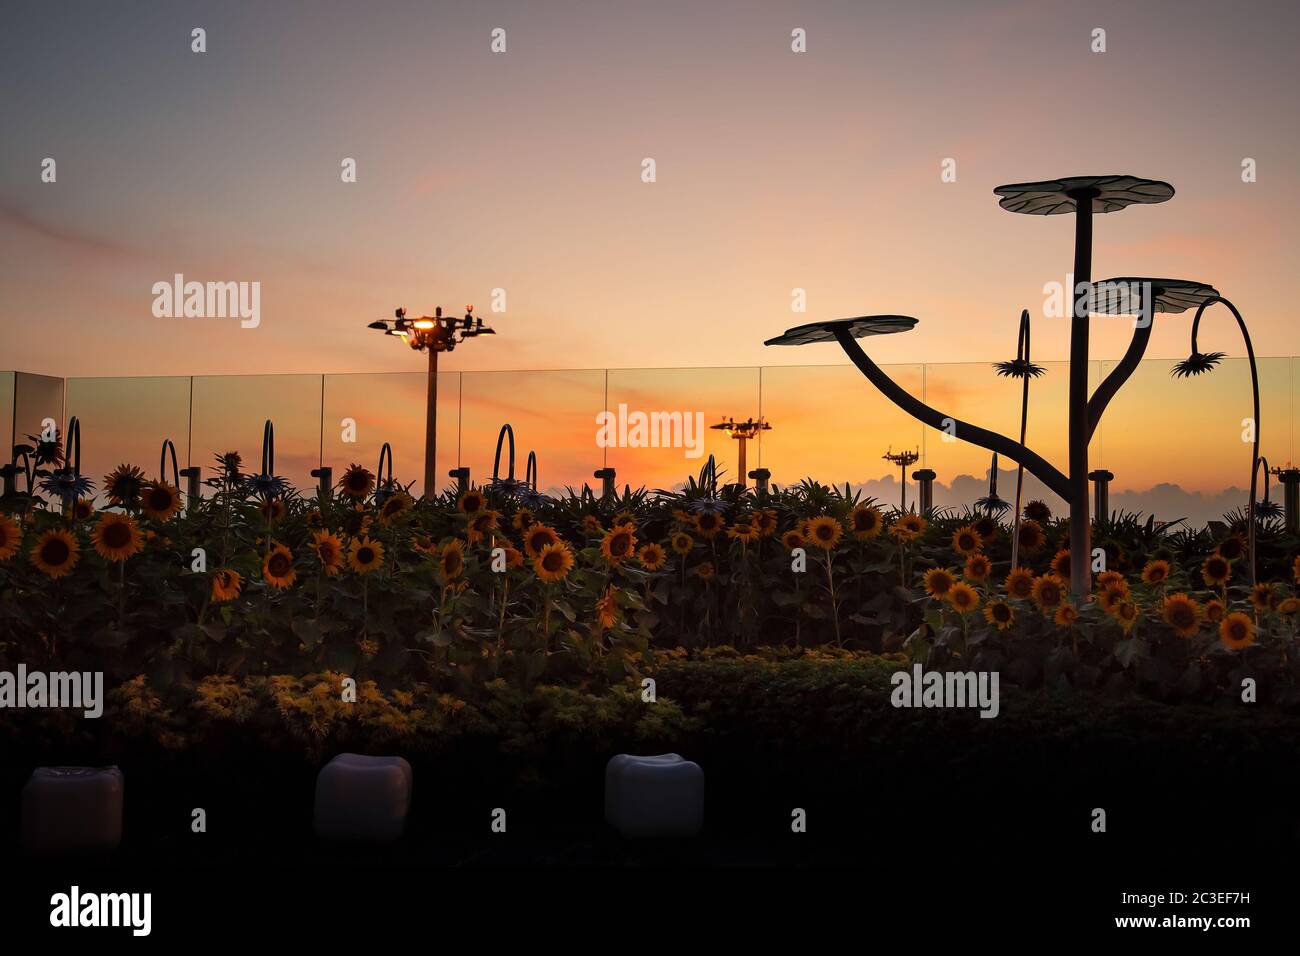 Singapore. March 2019. Sunflower garden in Changi airport at sunrise Stock Photo